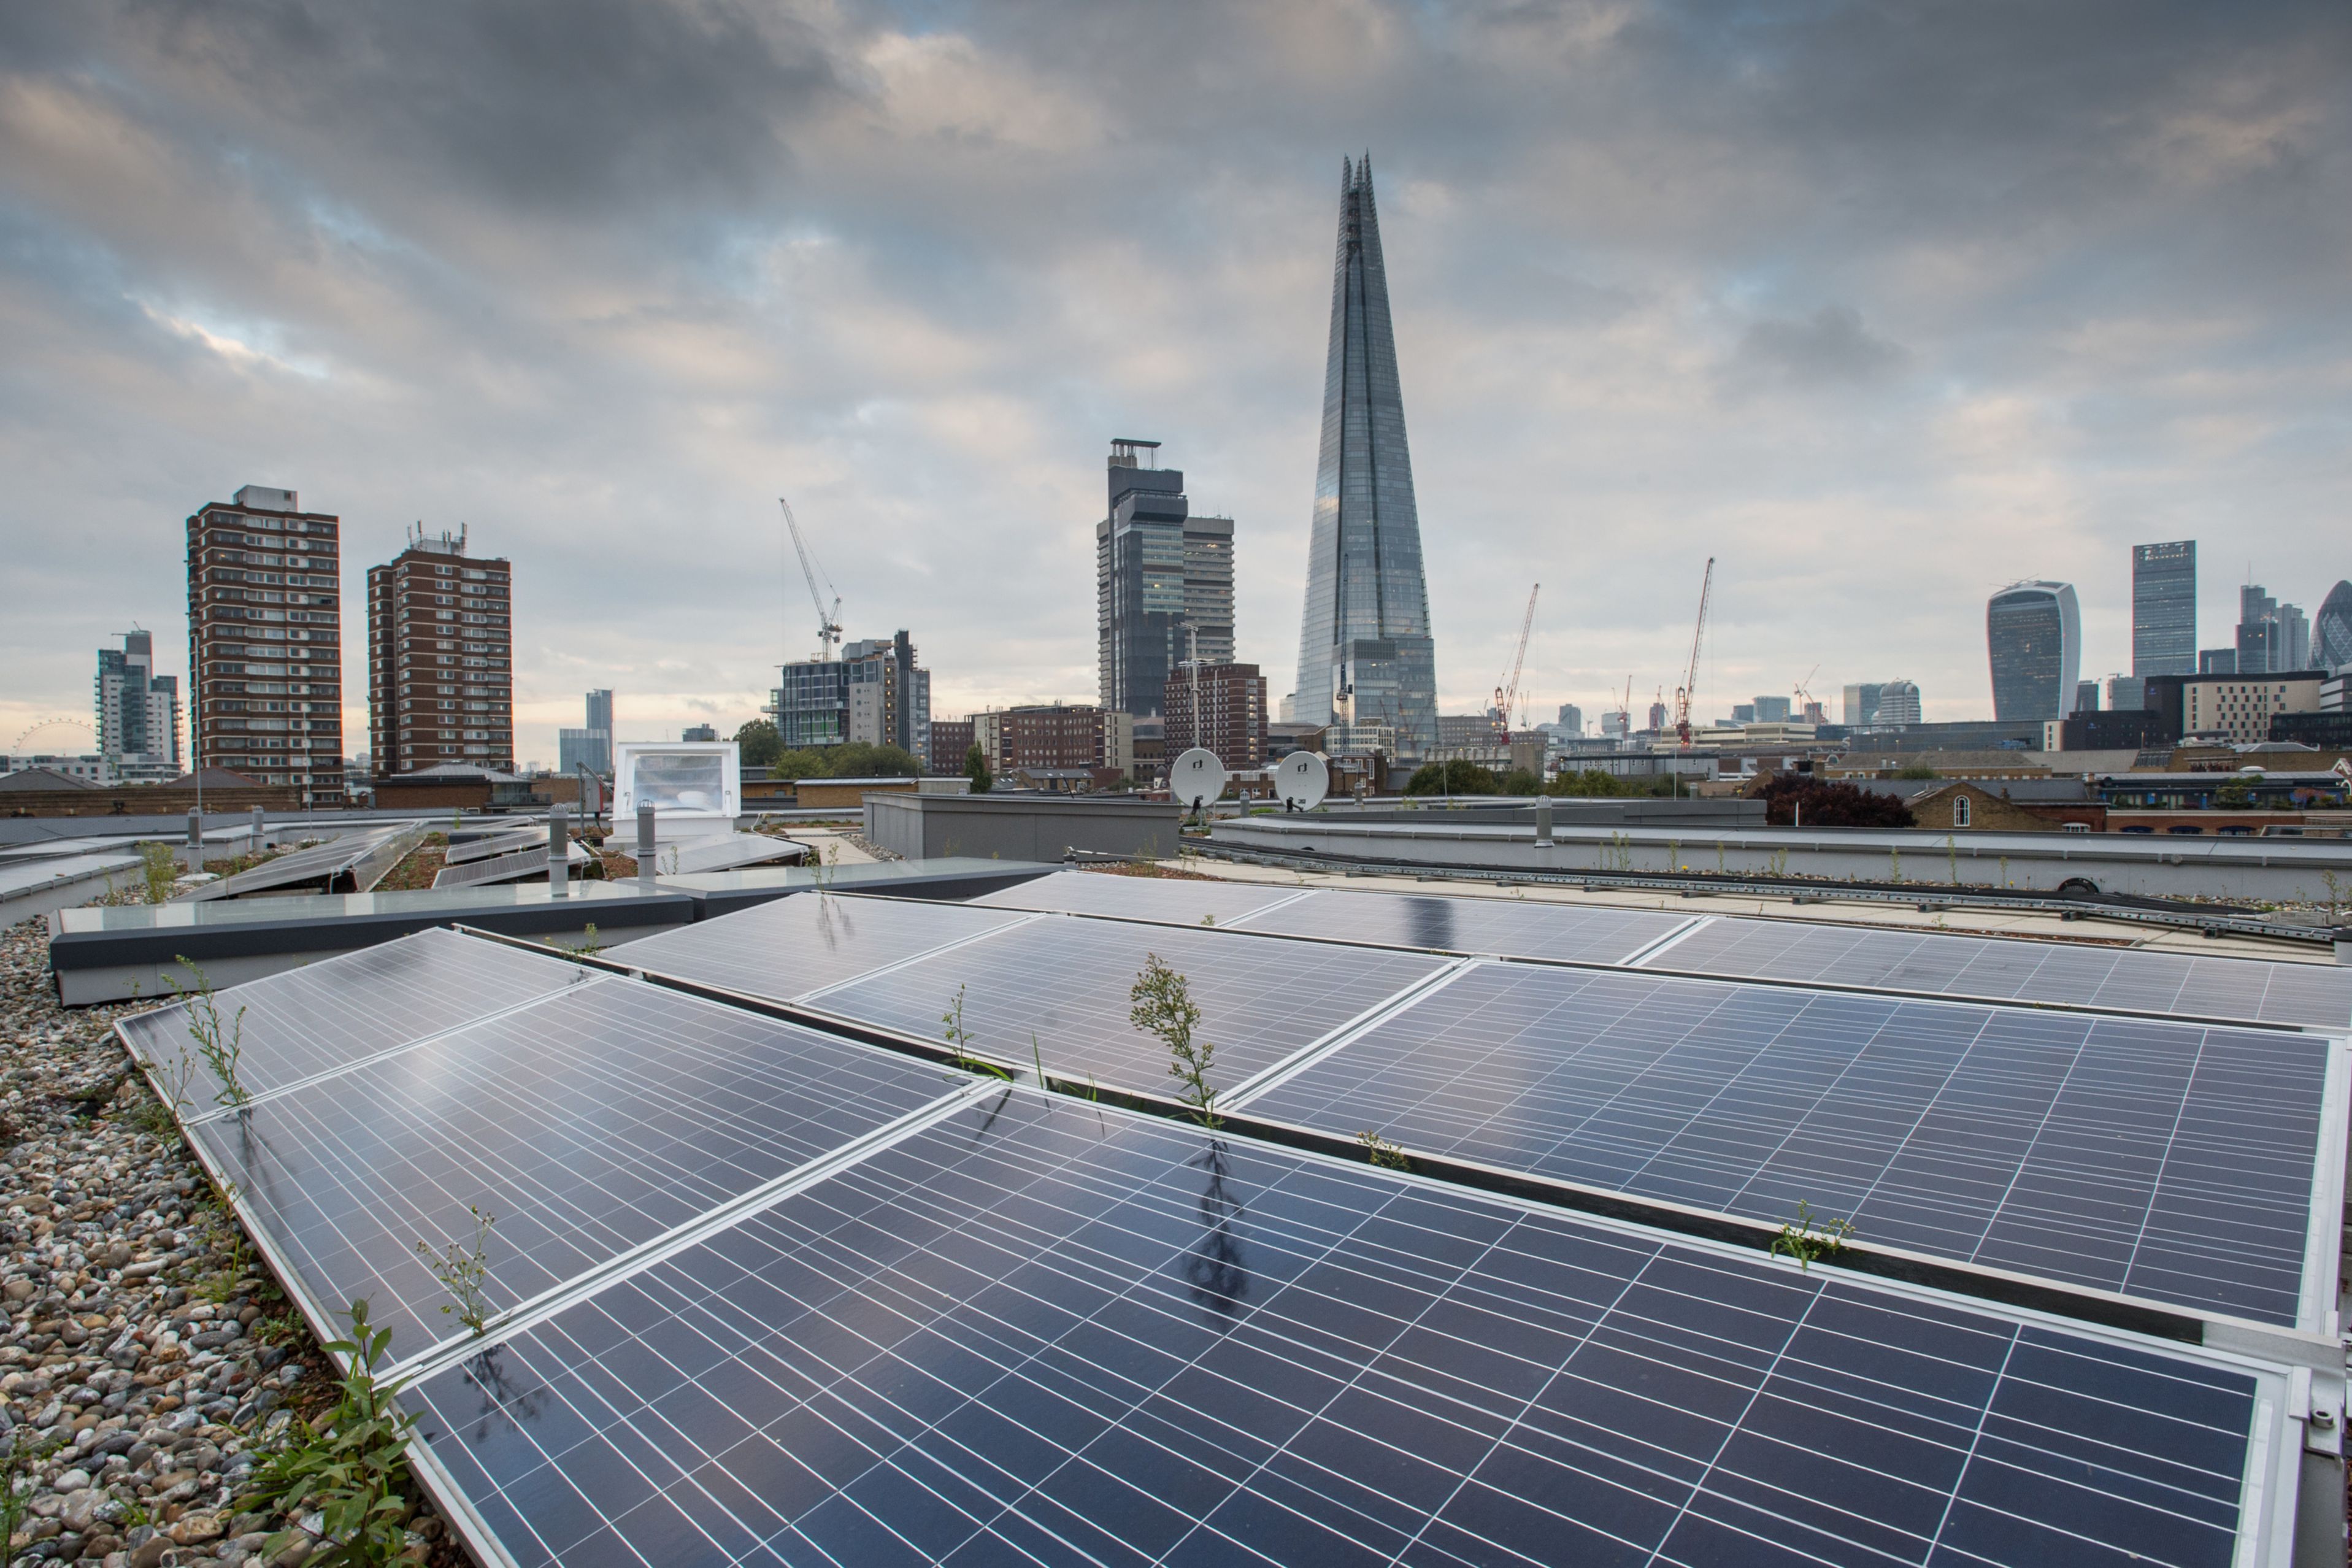 Solar roof with single-ply membrane installed on Bermondsey Village buildings in London in UK